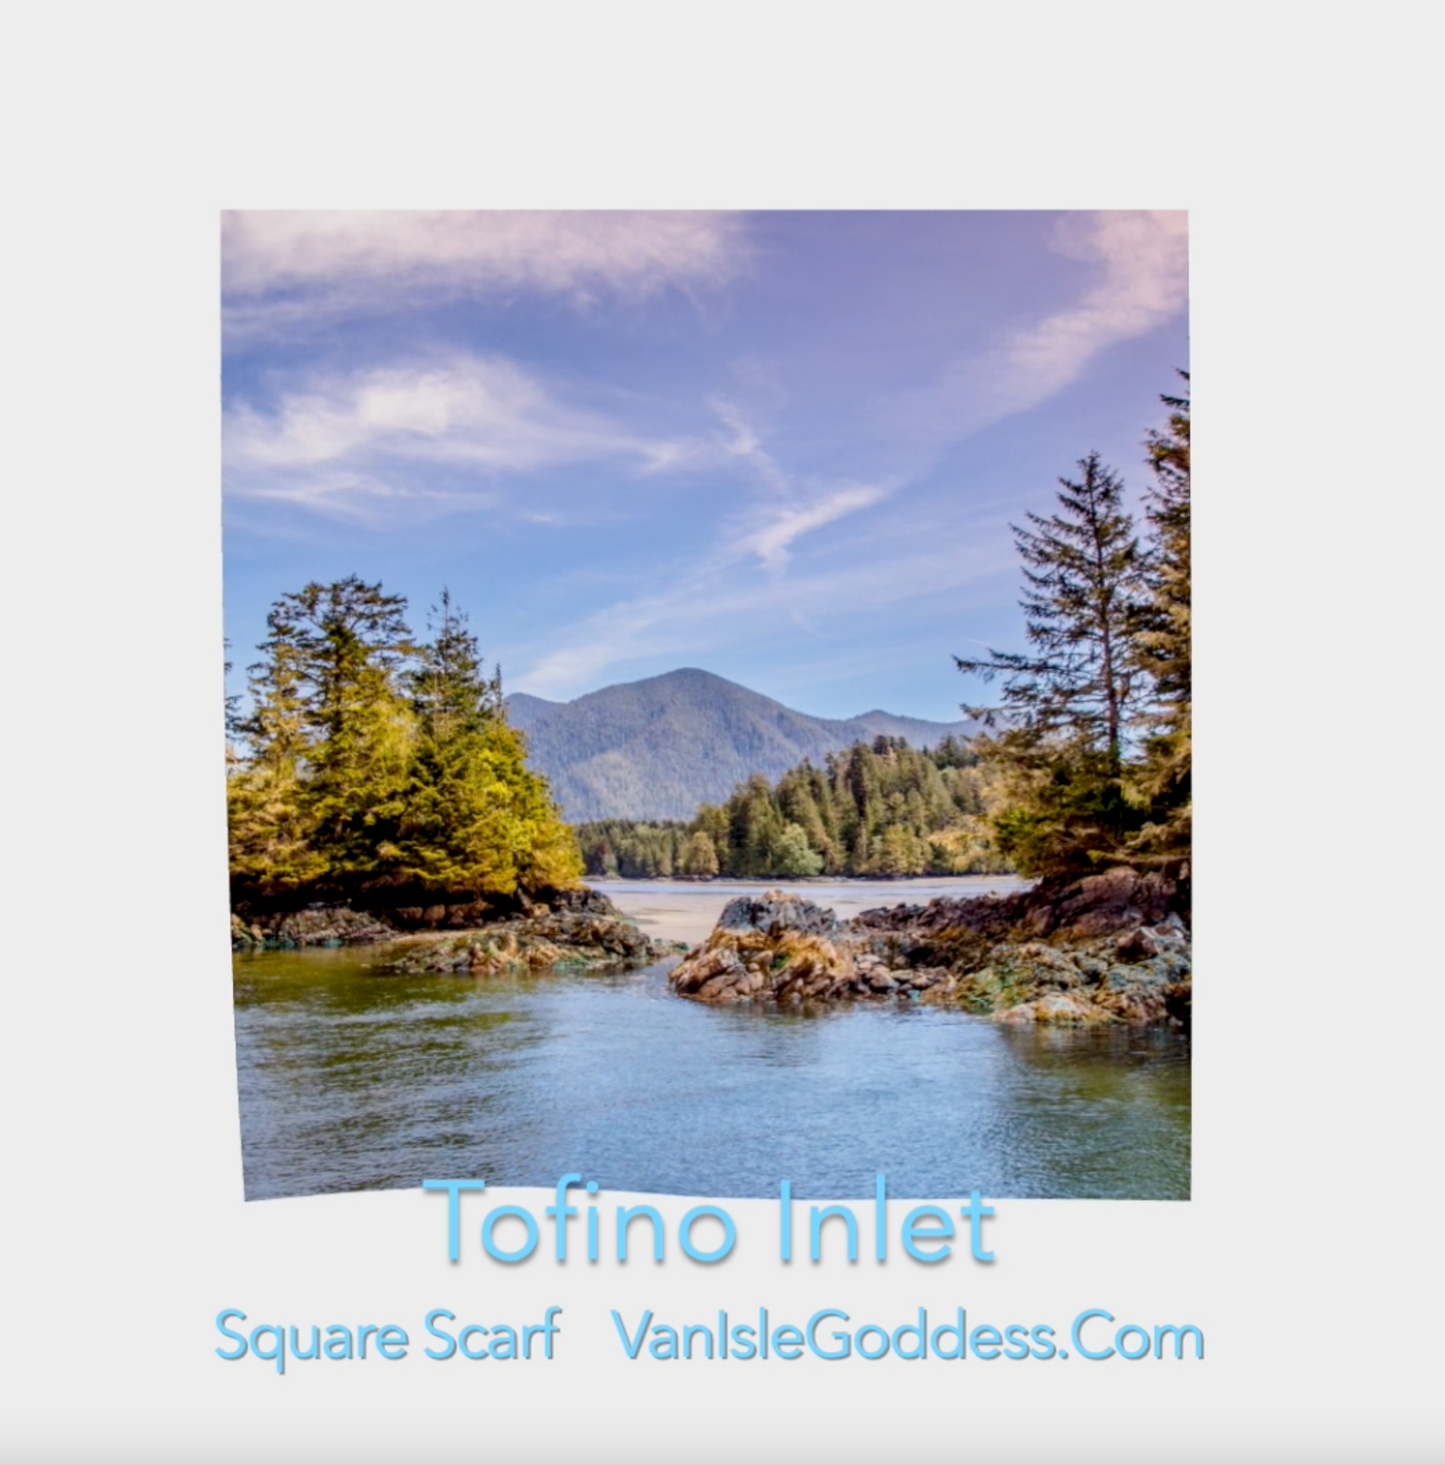 Tofino Inlet square scarf shown full size